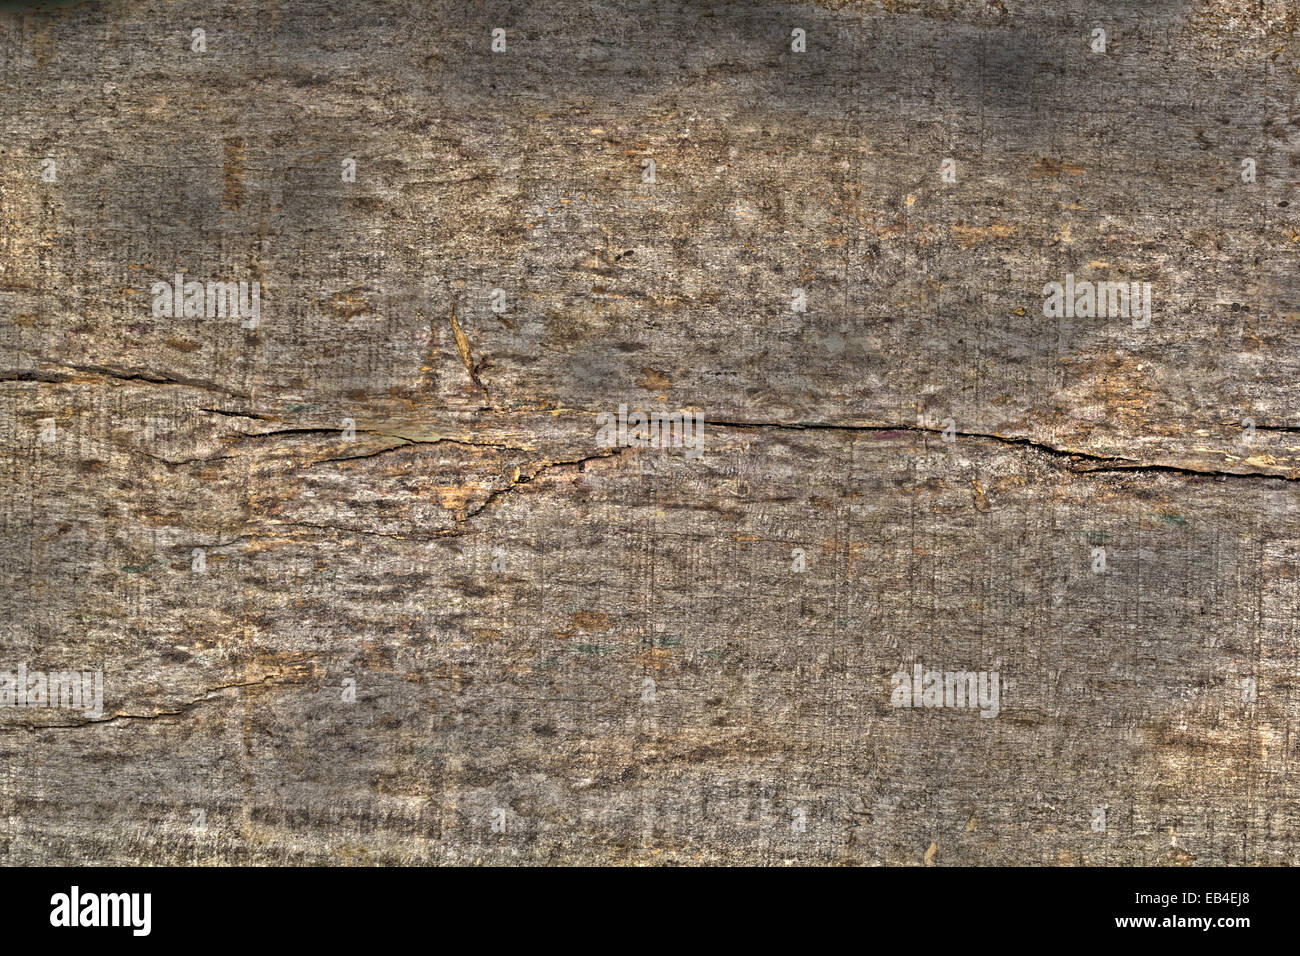 Texture of bark wood use as natural background Stock Photo